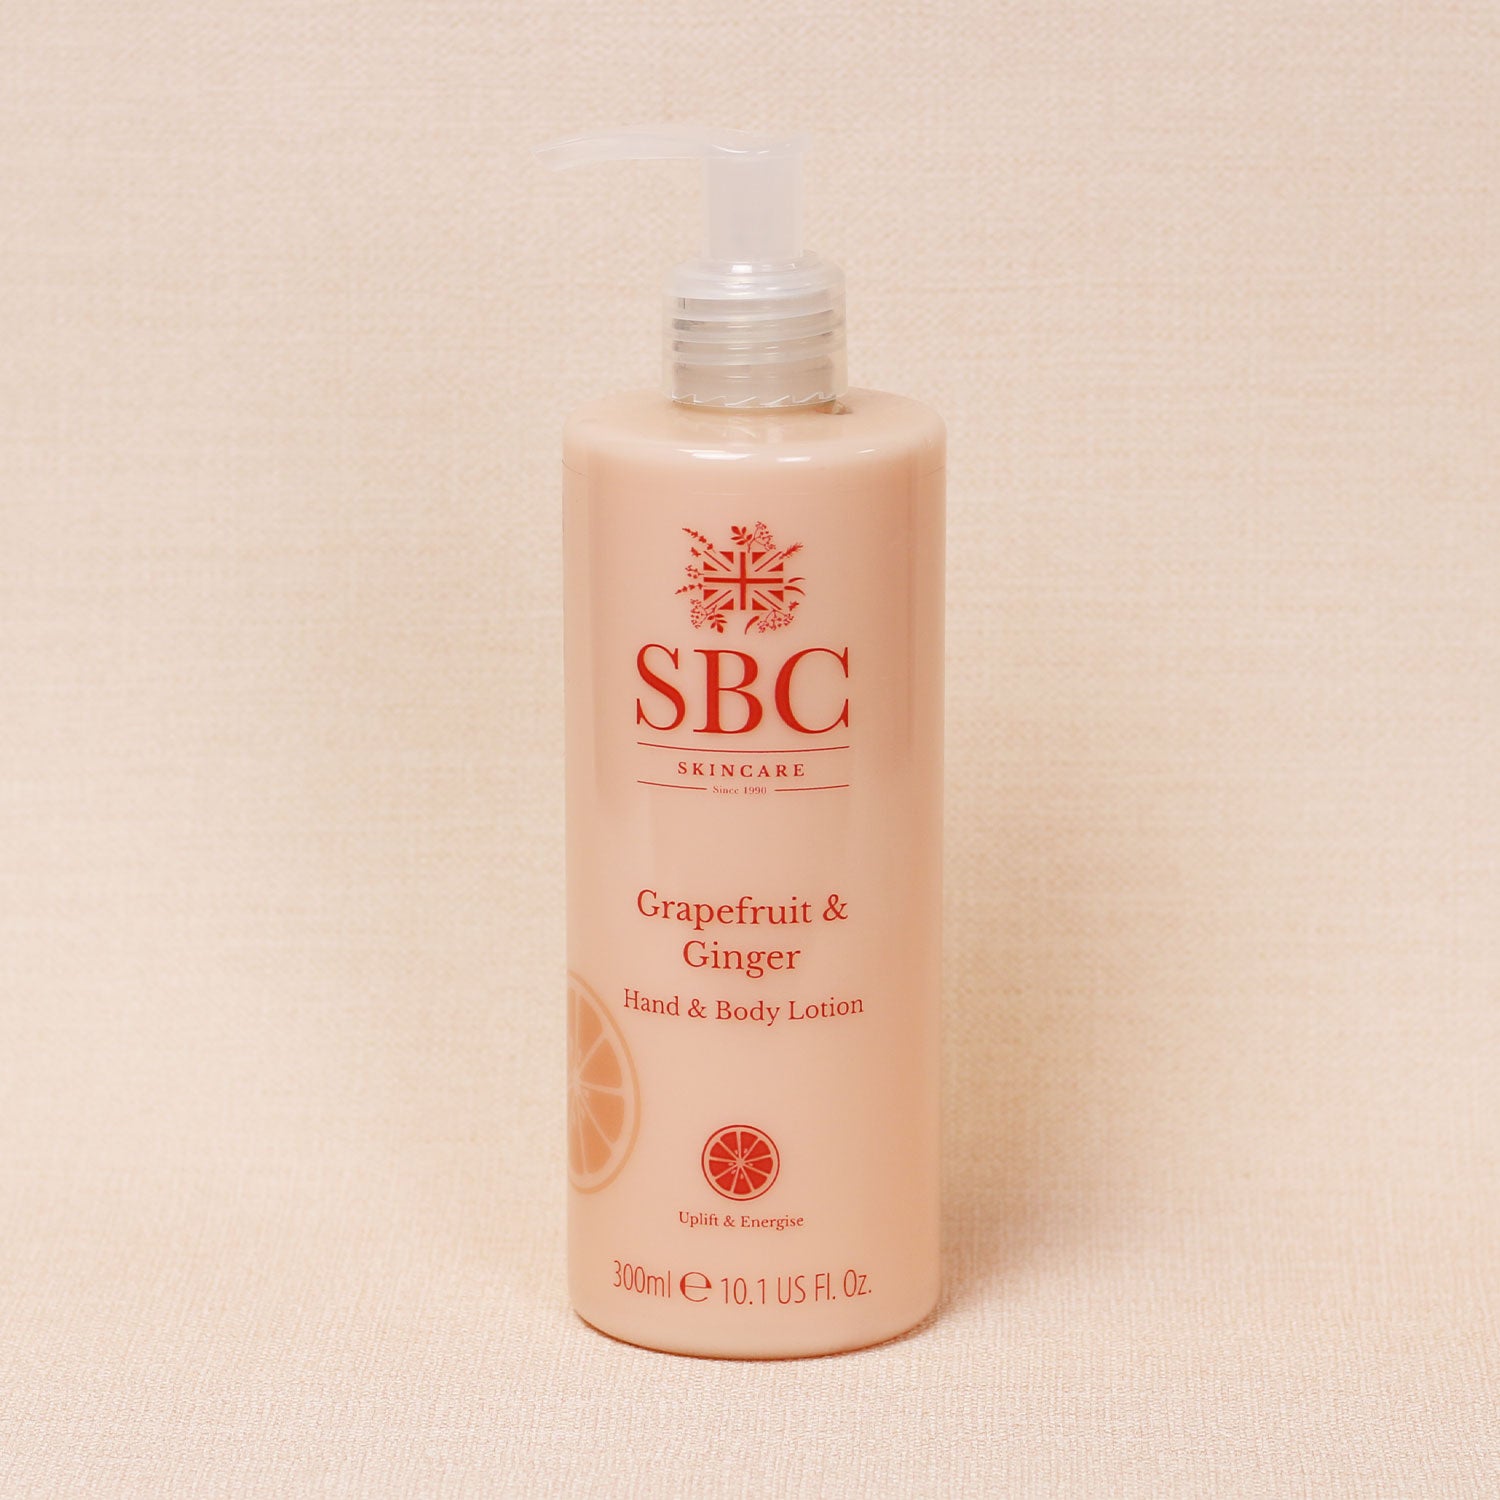 Grapefruit & Ginger Hand & Body Lotion on a textured peach background 